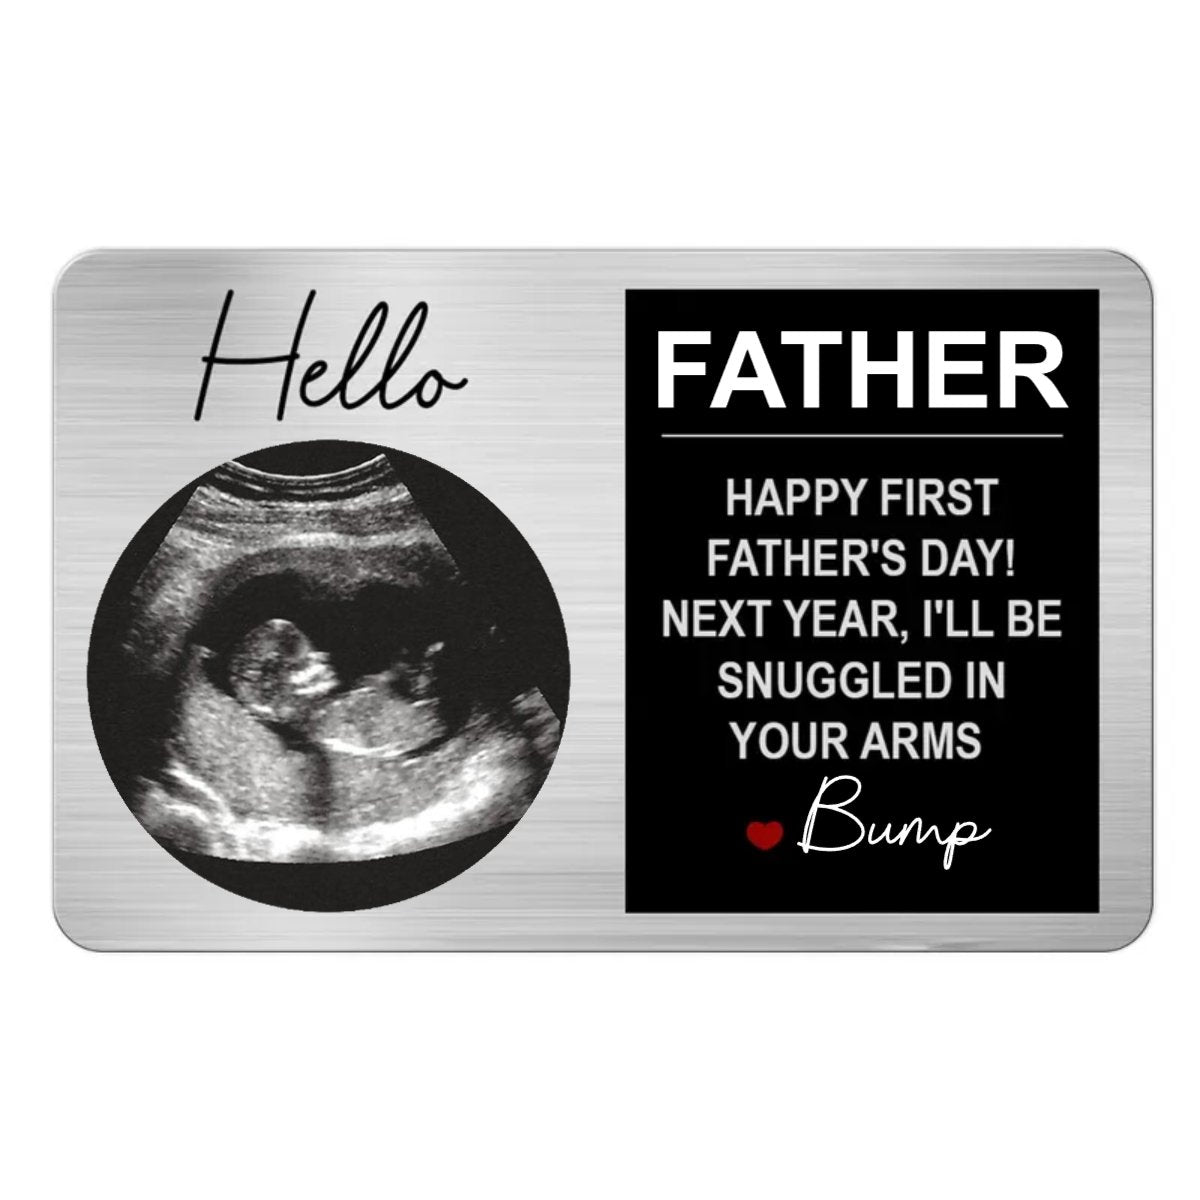 Family - Next Year I'll Be Snuggled In Your Arms - Personalized Custom Aluminum Wallet Card - The Next Custom Gift